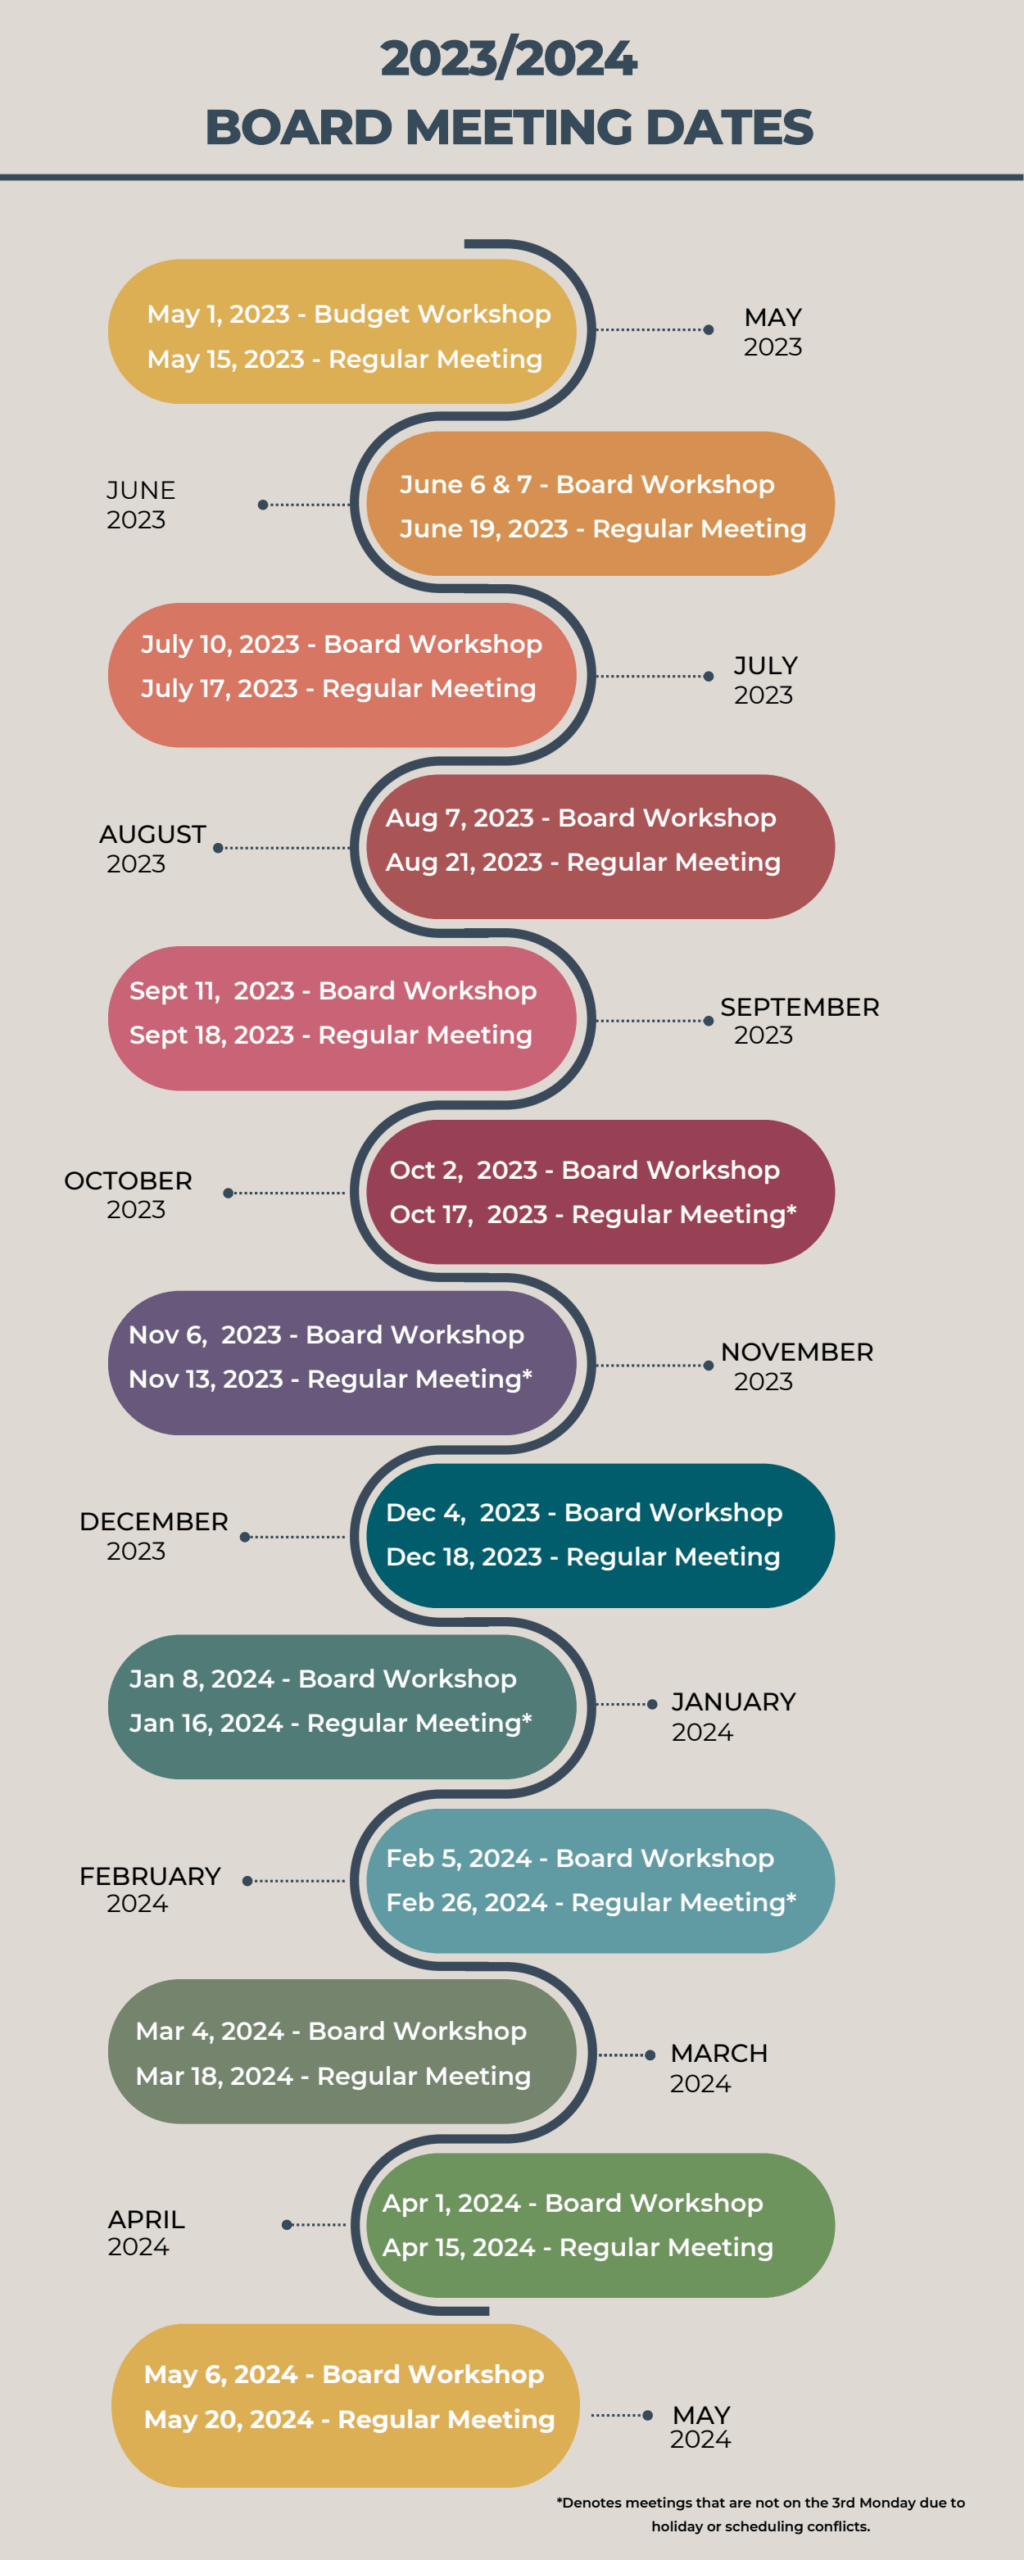 MISD Board meeting dates in colored text